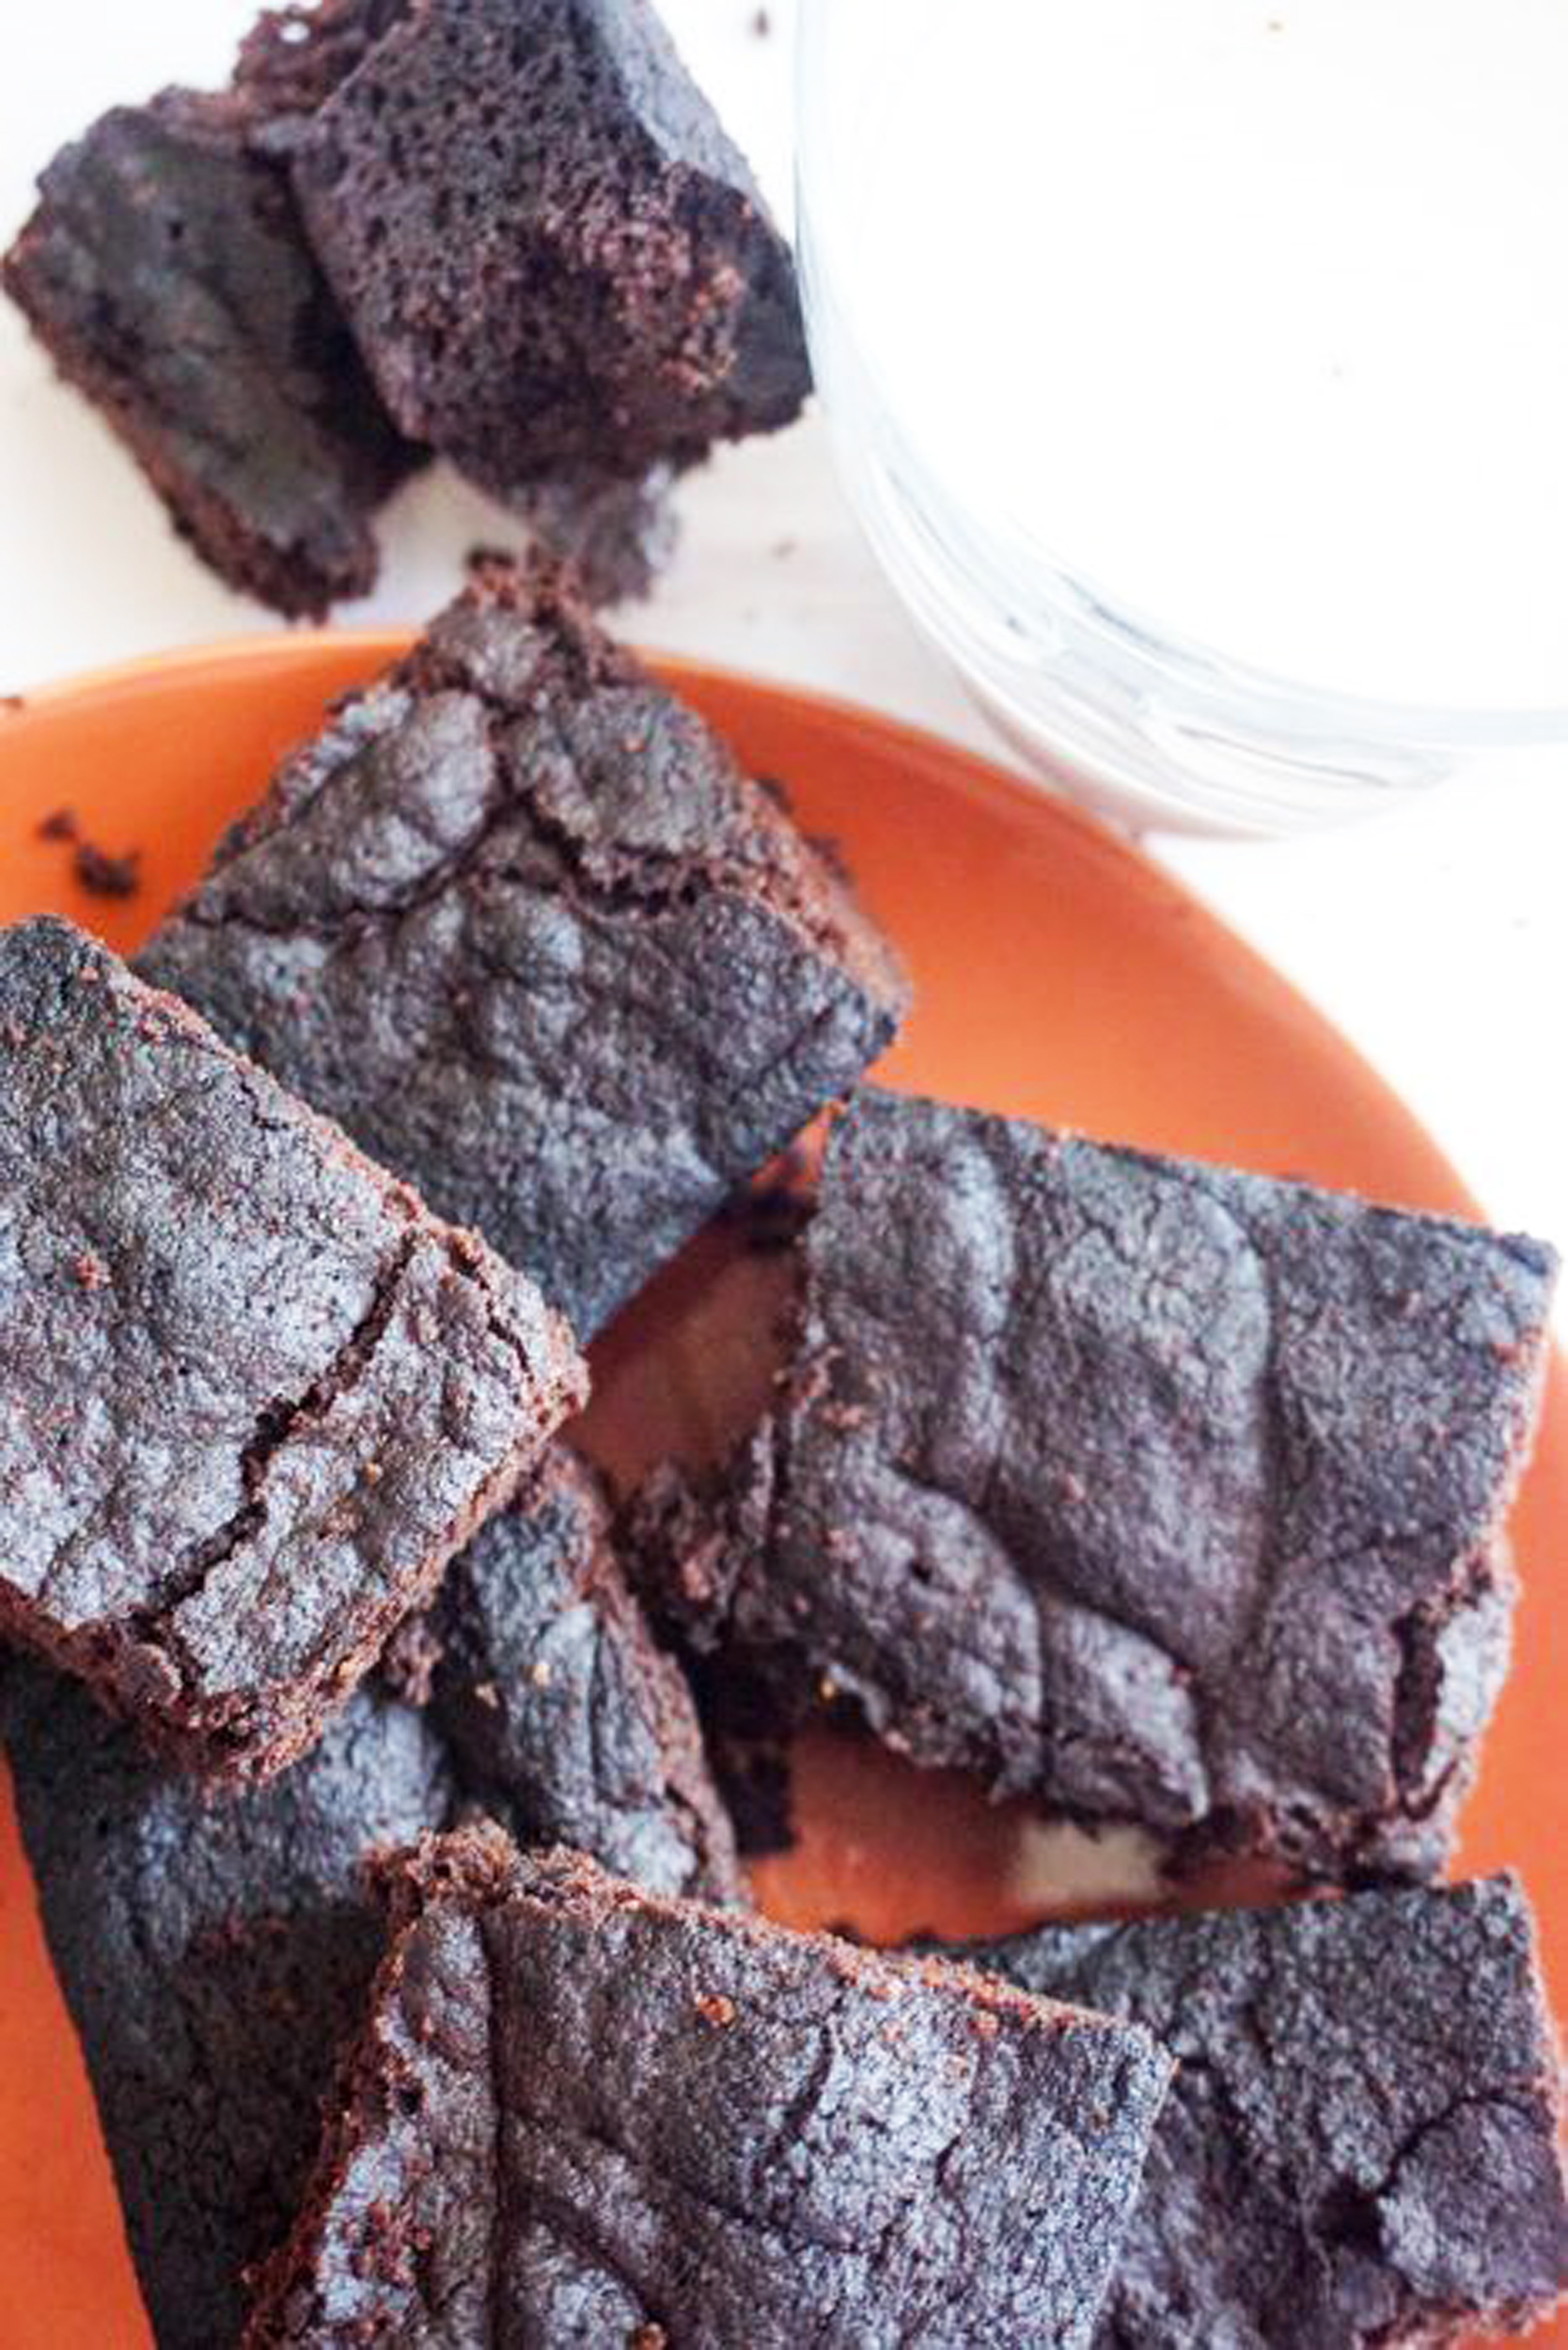 PHOTO: Keto brownies by Ketoconnect.com are pictured.